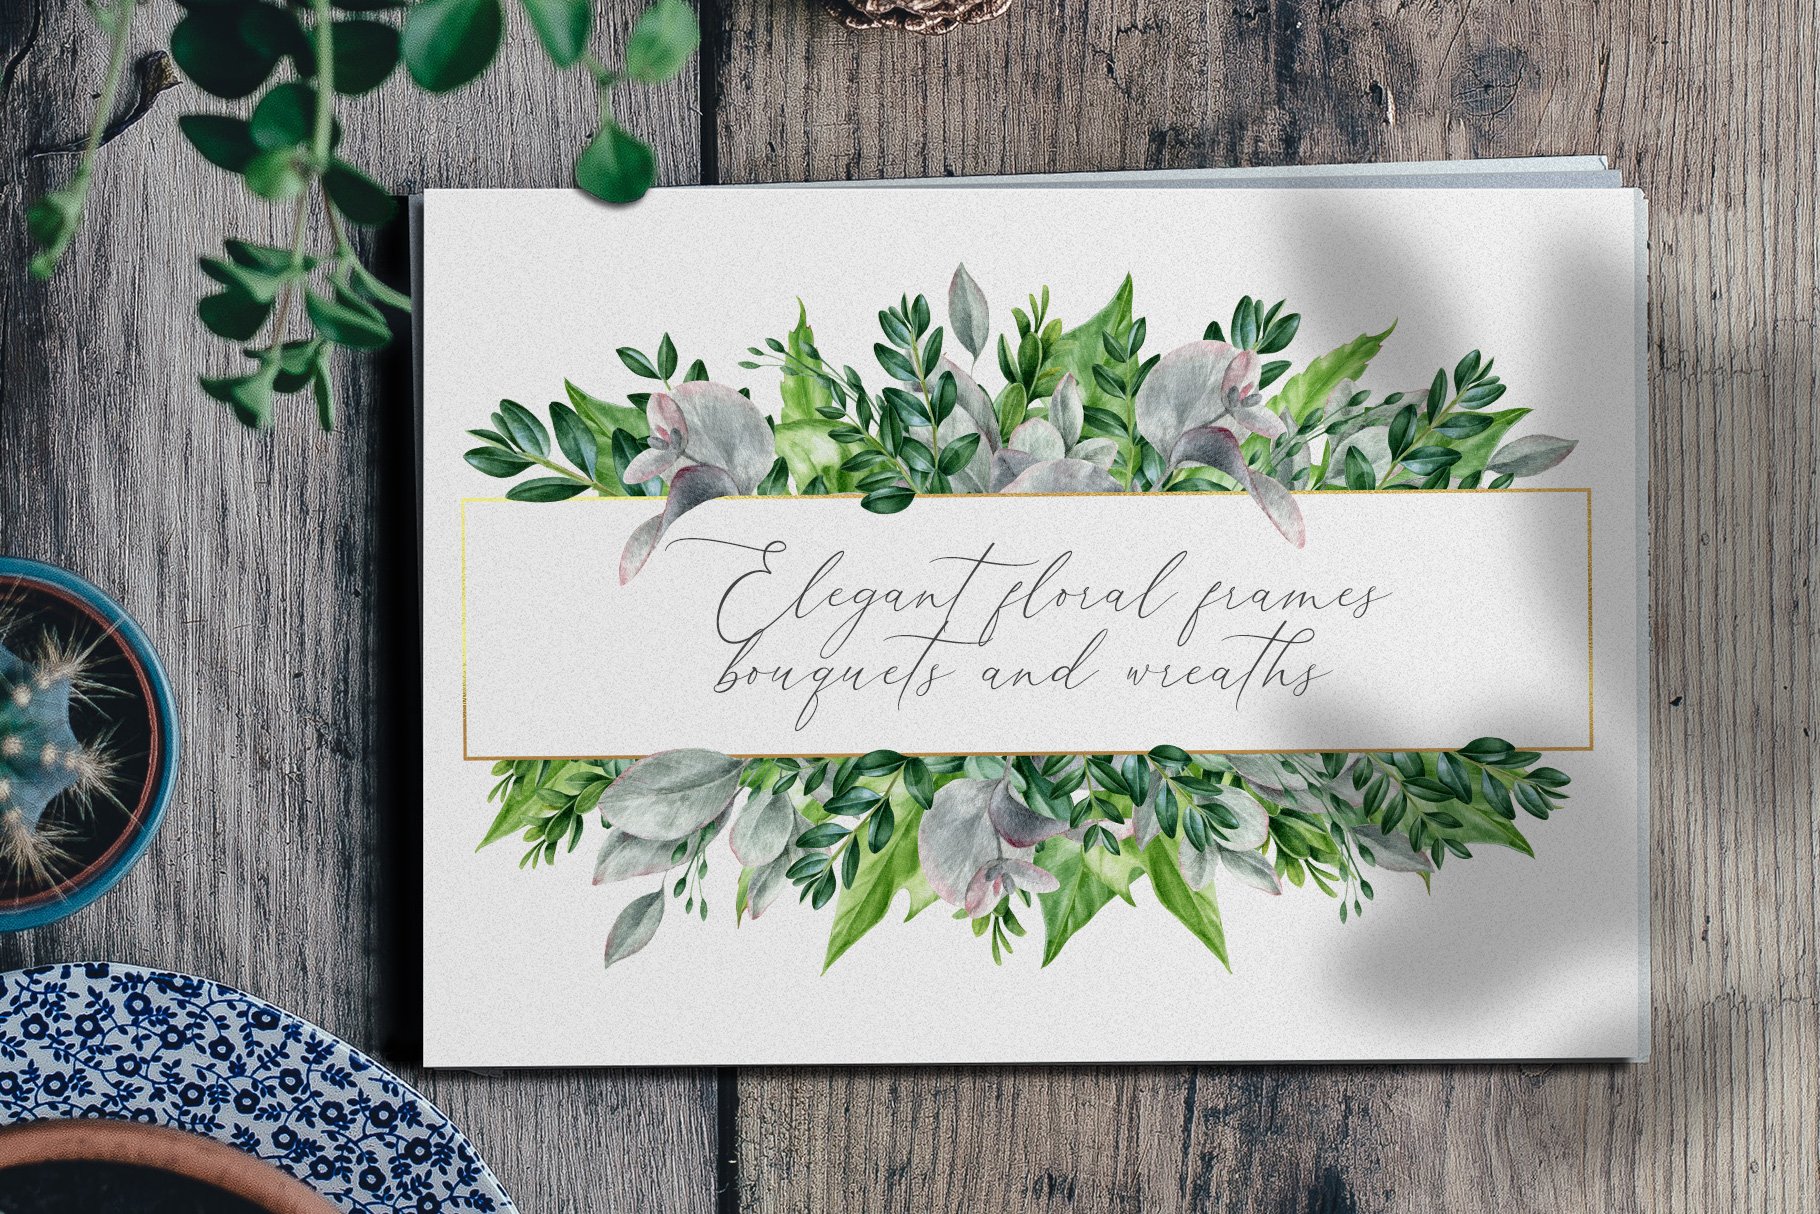 Greeting card with a watercolor floral design.